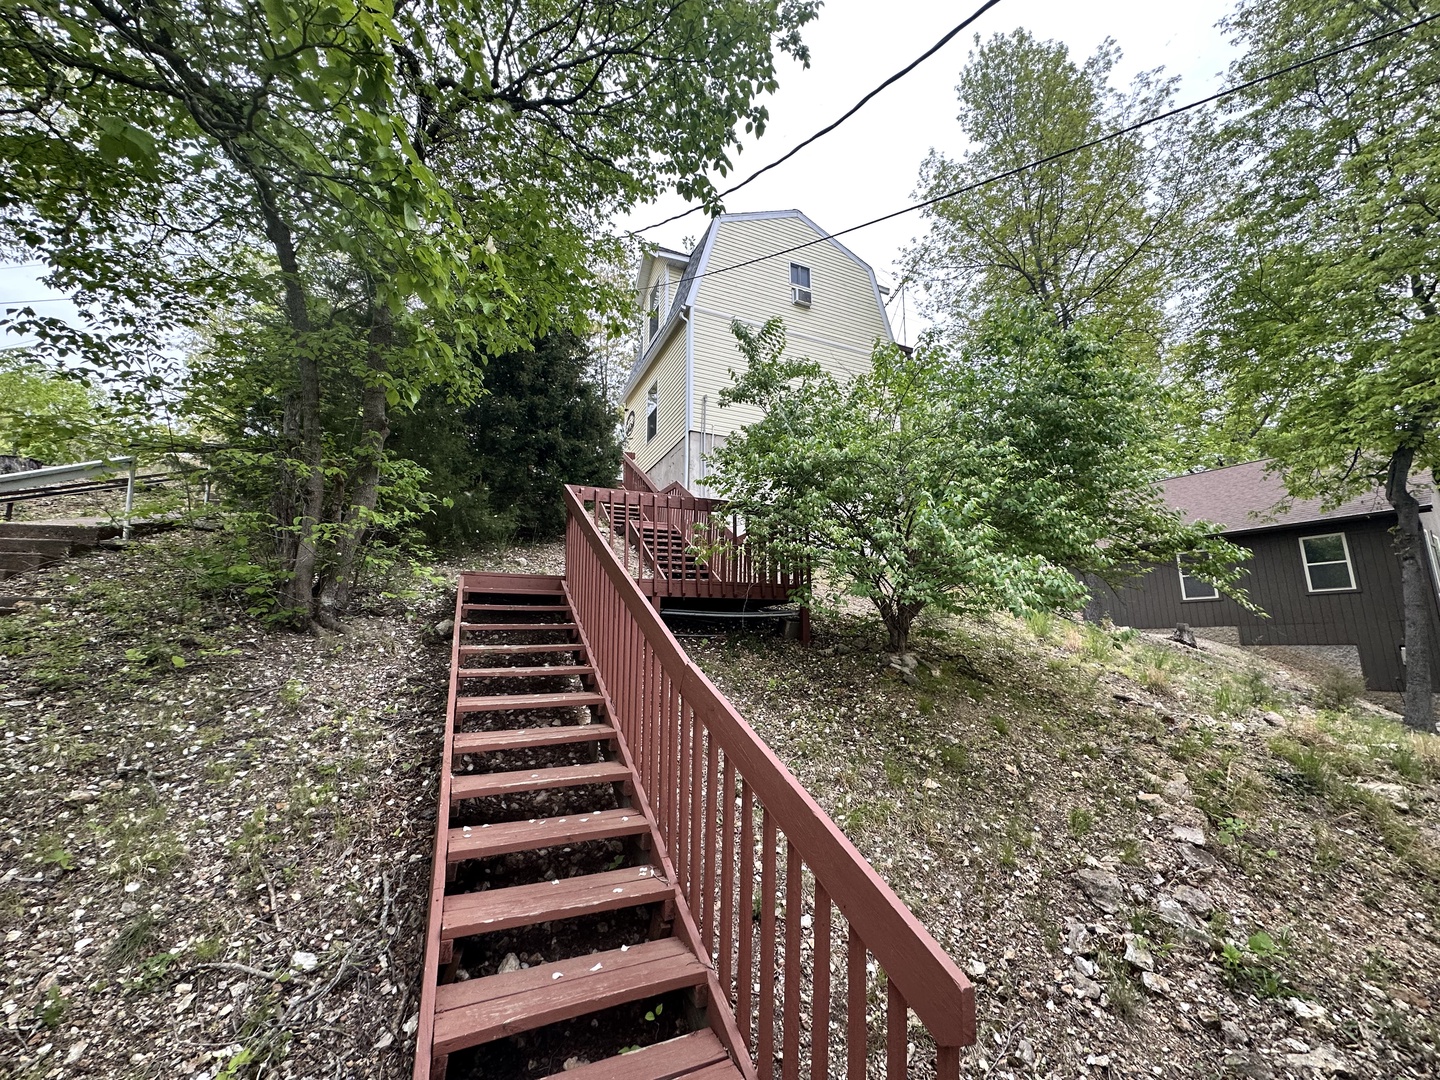 Stairs up to garage and parking